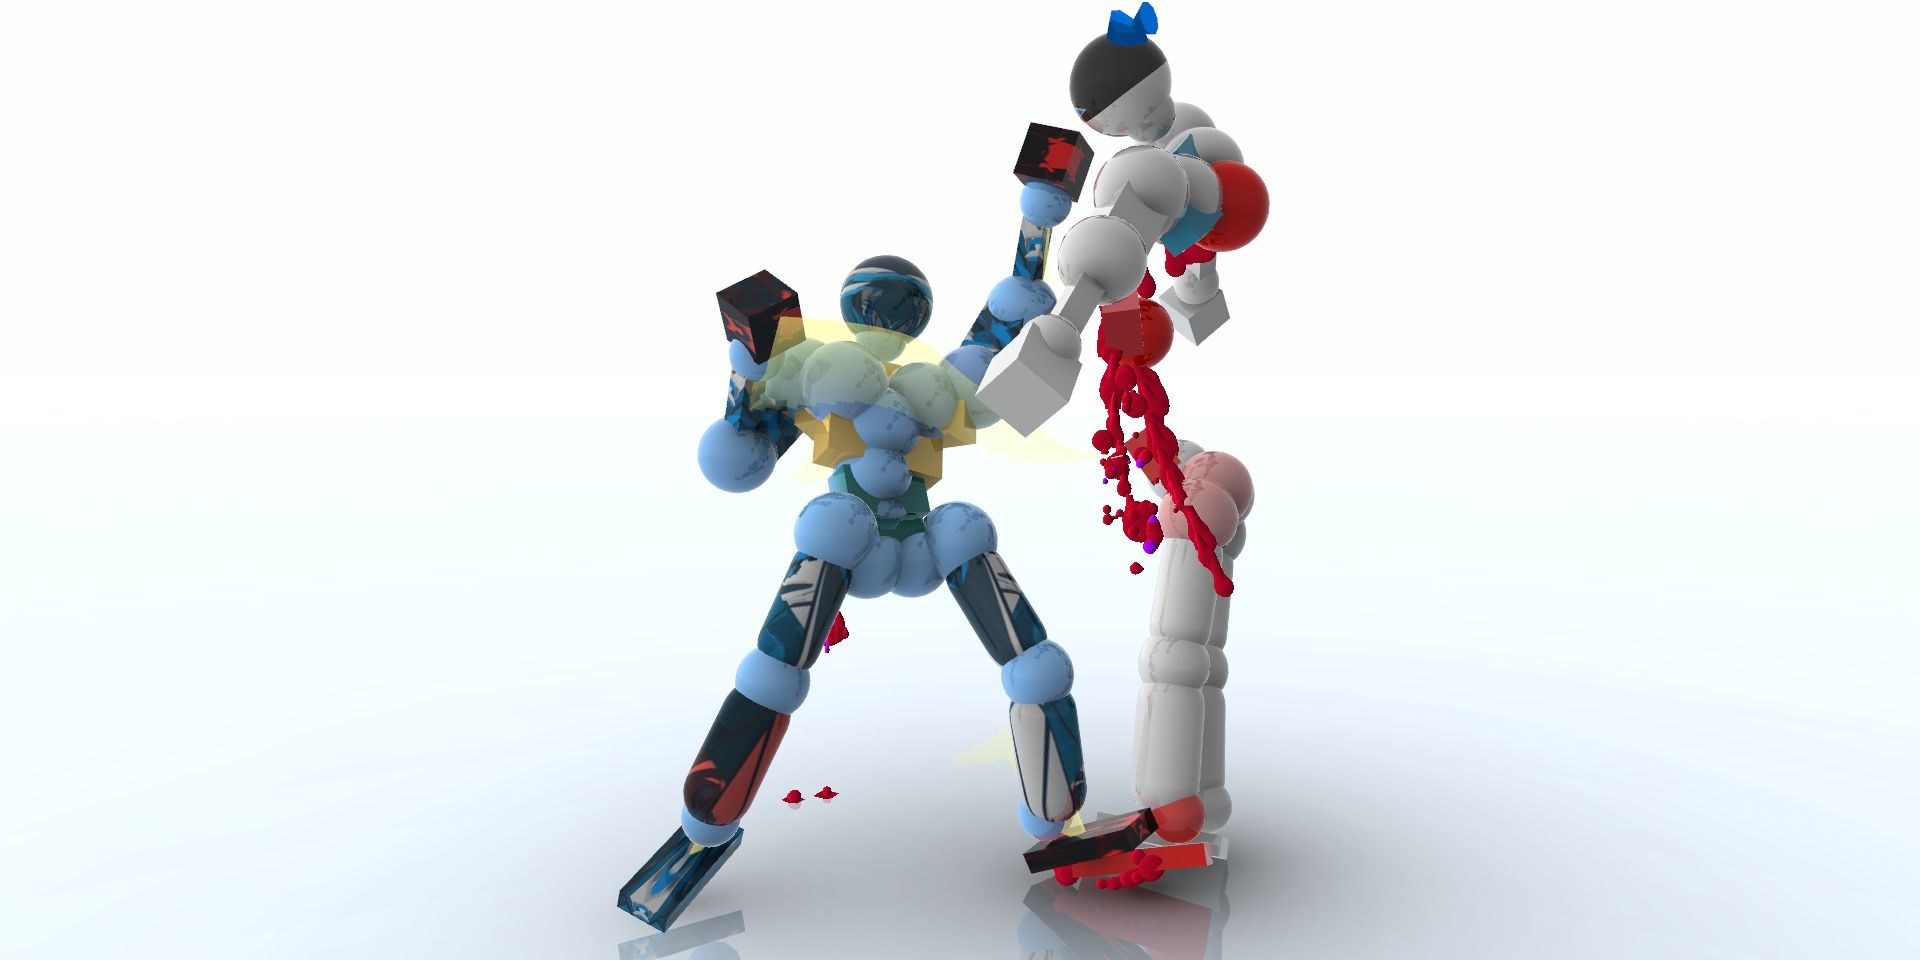 A blue character that has performed an uppercut on another character, who is split in half with blood gushing out of them in Toribash